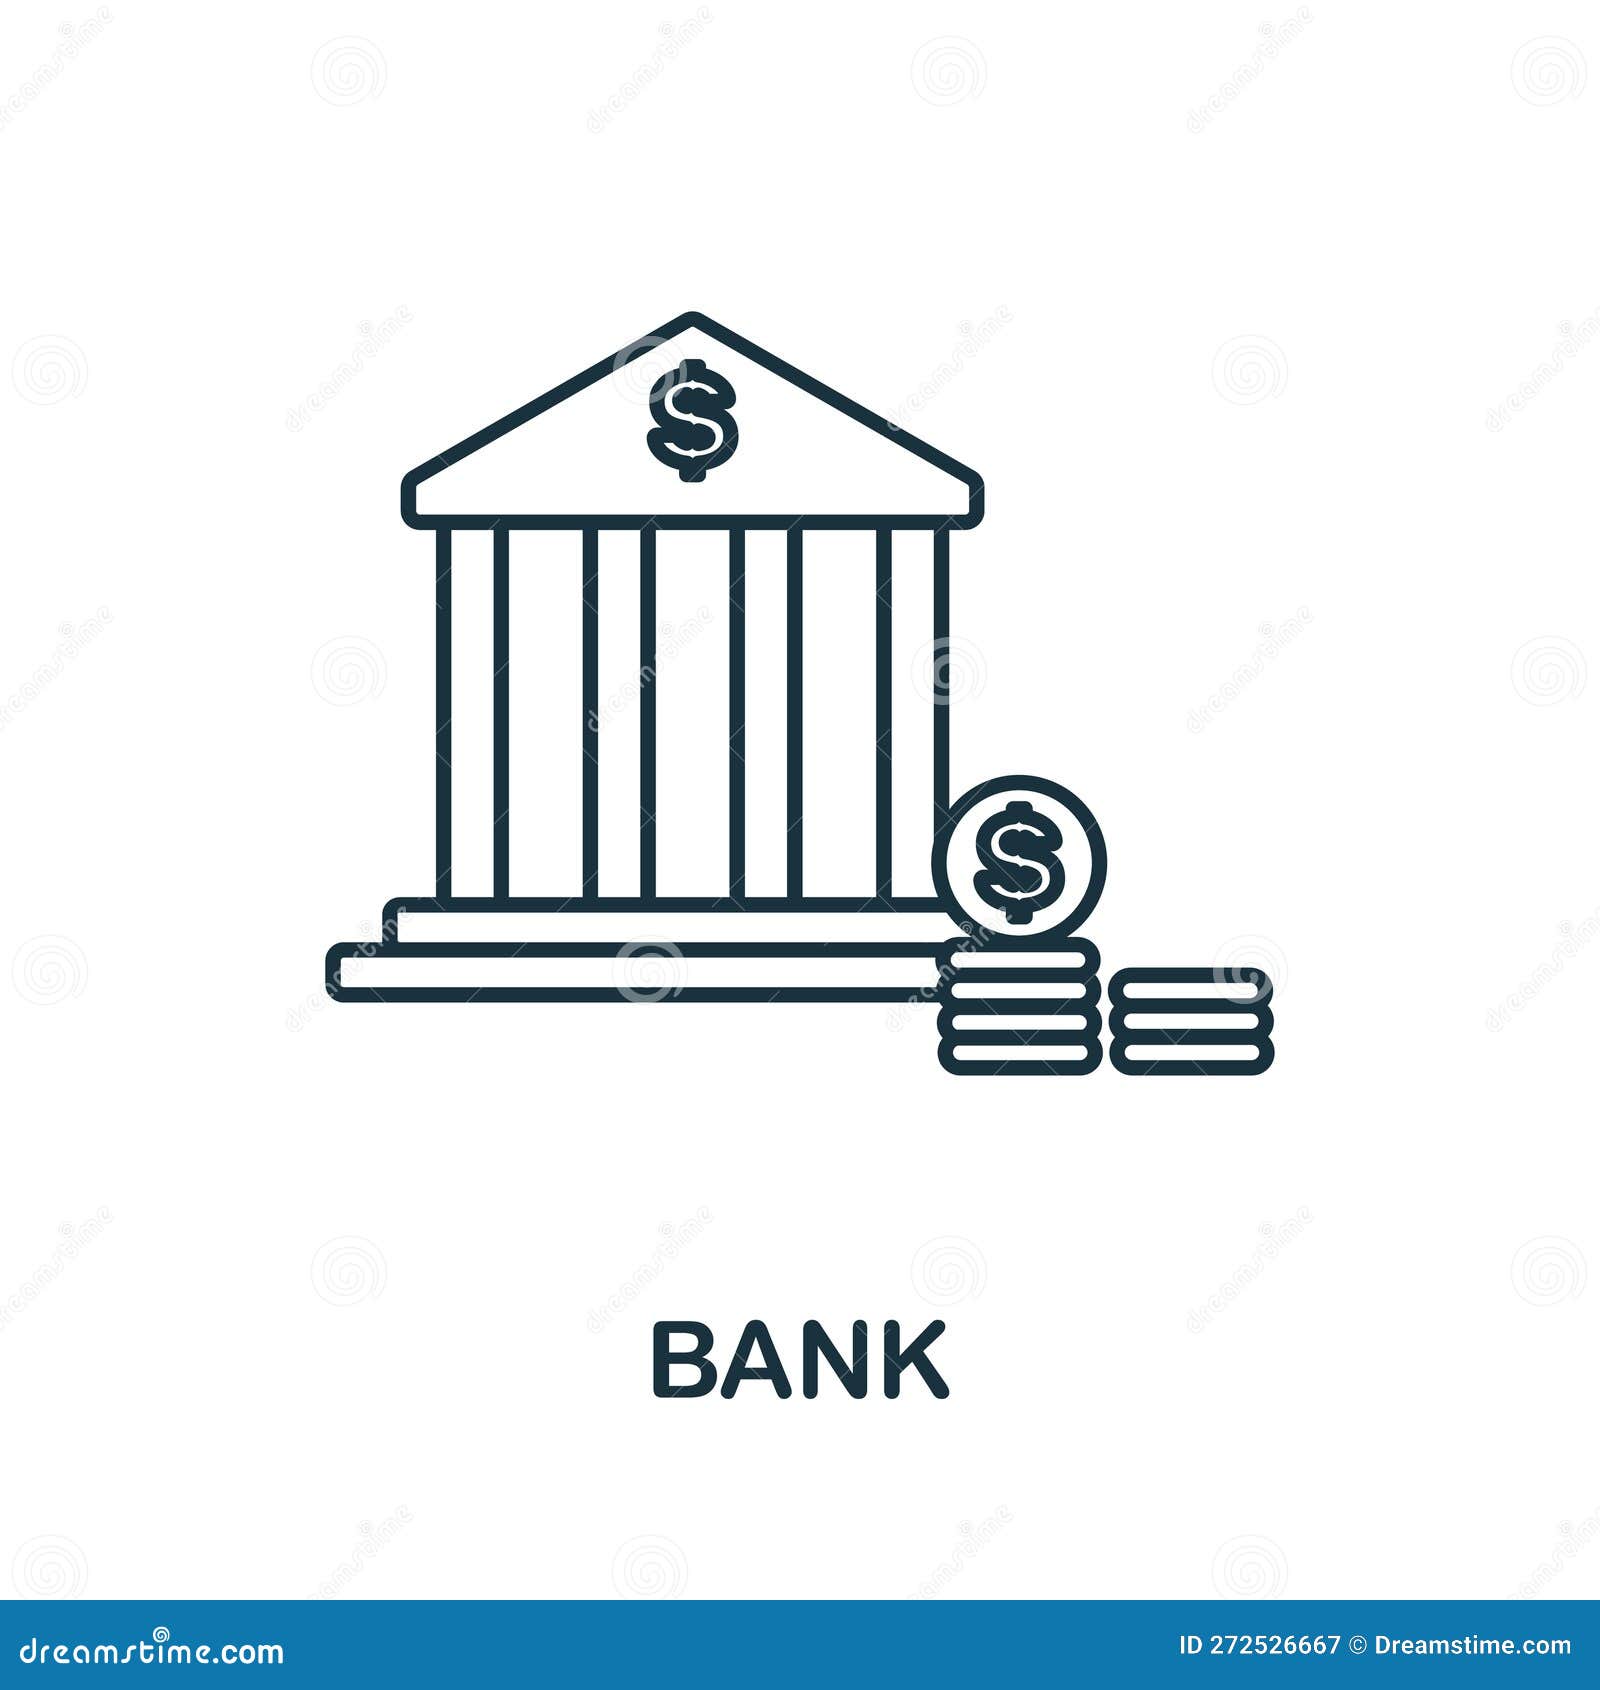 Bank Line Icon. Monochrome Simple Bank Outline Icon for Templates